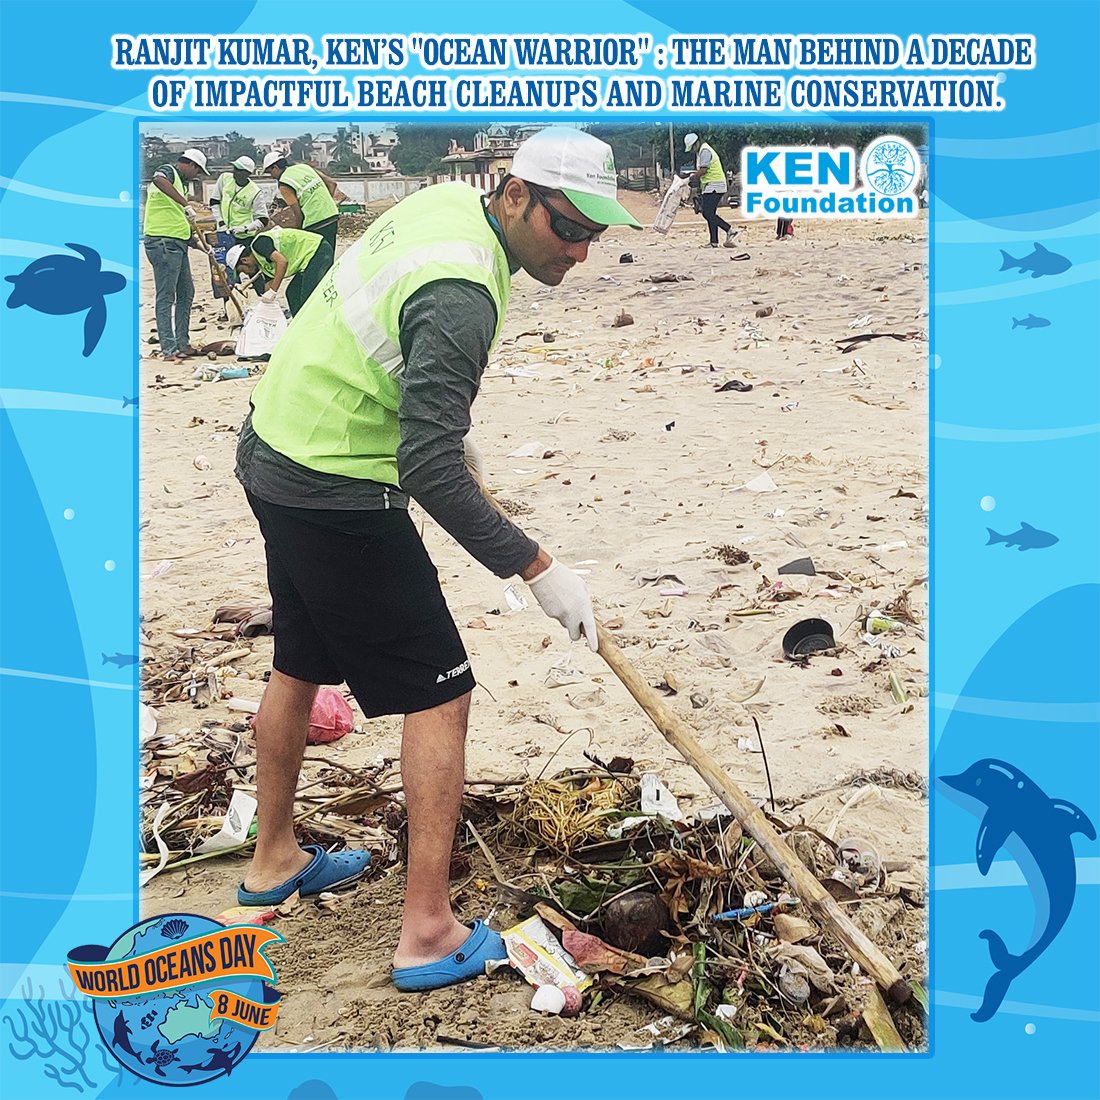 Ranjit Kumar, Ken's 'Ocean Warrior,' is the man behind a decade of #impactful #BeachCleanups & #MarineConservation efforts. He guides #KenFoundation in #environmentalism, with a specific focus on reducing #PlasticPollution in the #oceans & on #beaches #WorldOceansDay #MarineLife